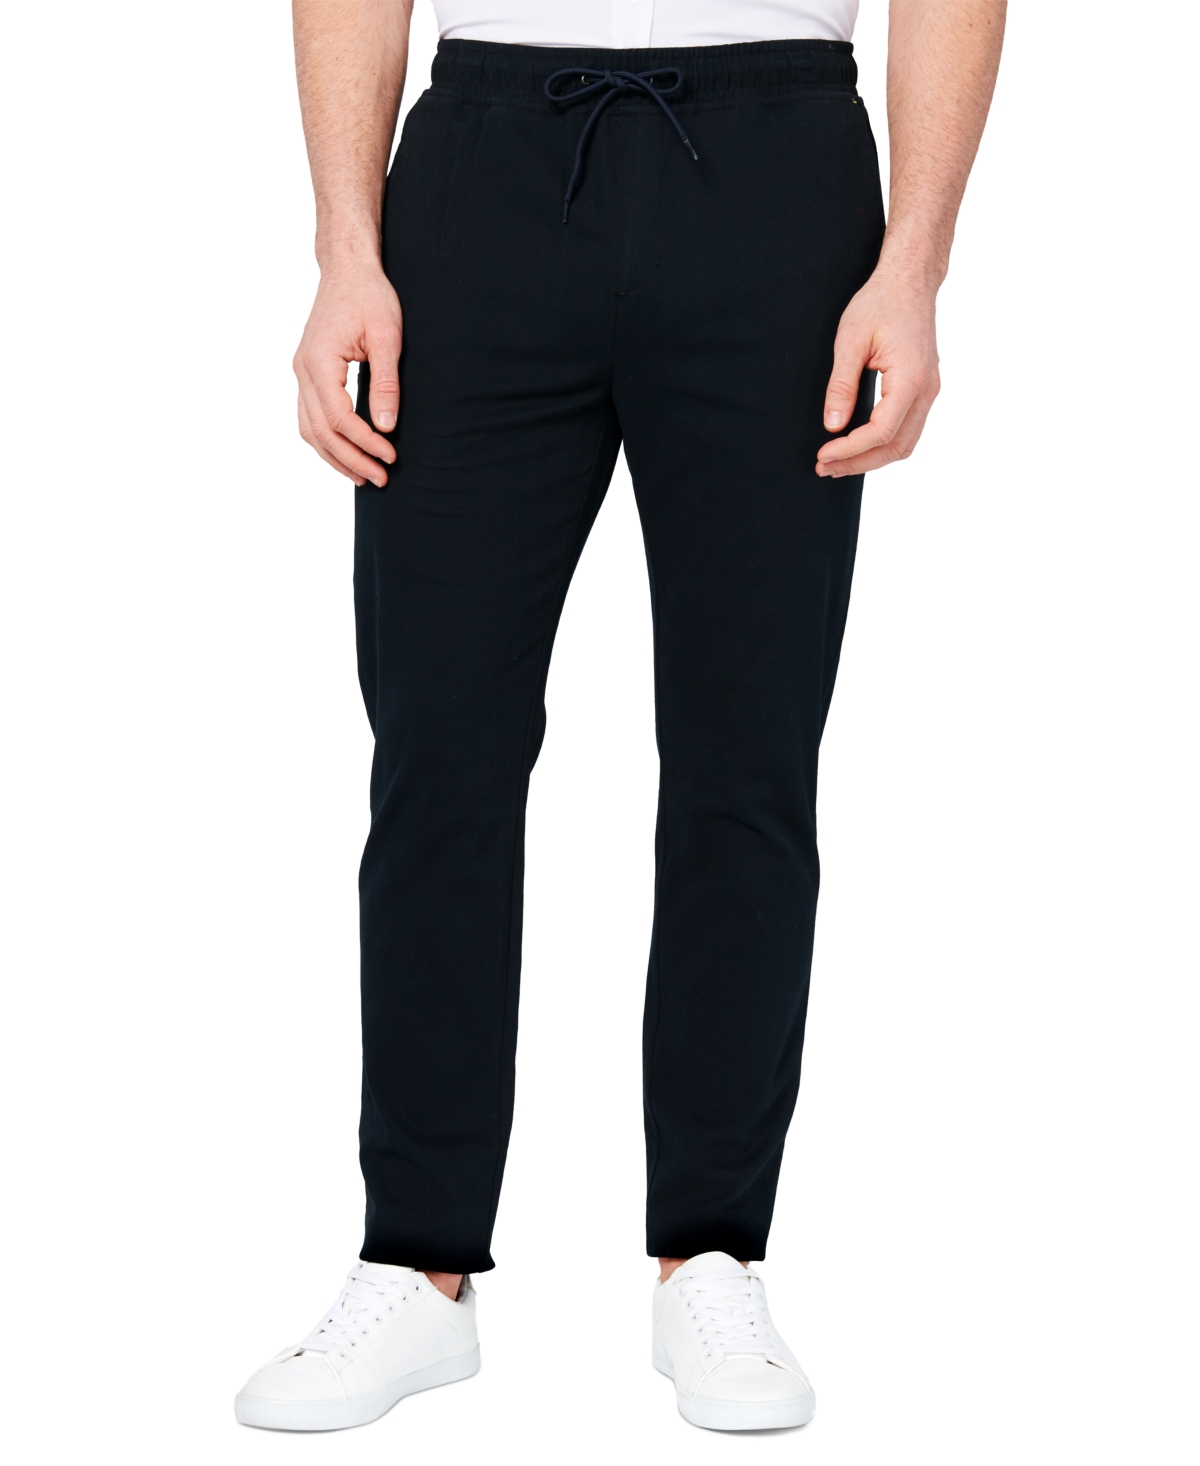 Society Of Threads Men's Slim Fit Solid Drawstring Pants In Black